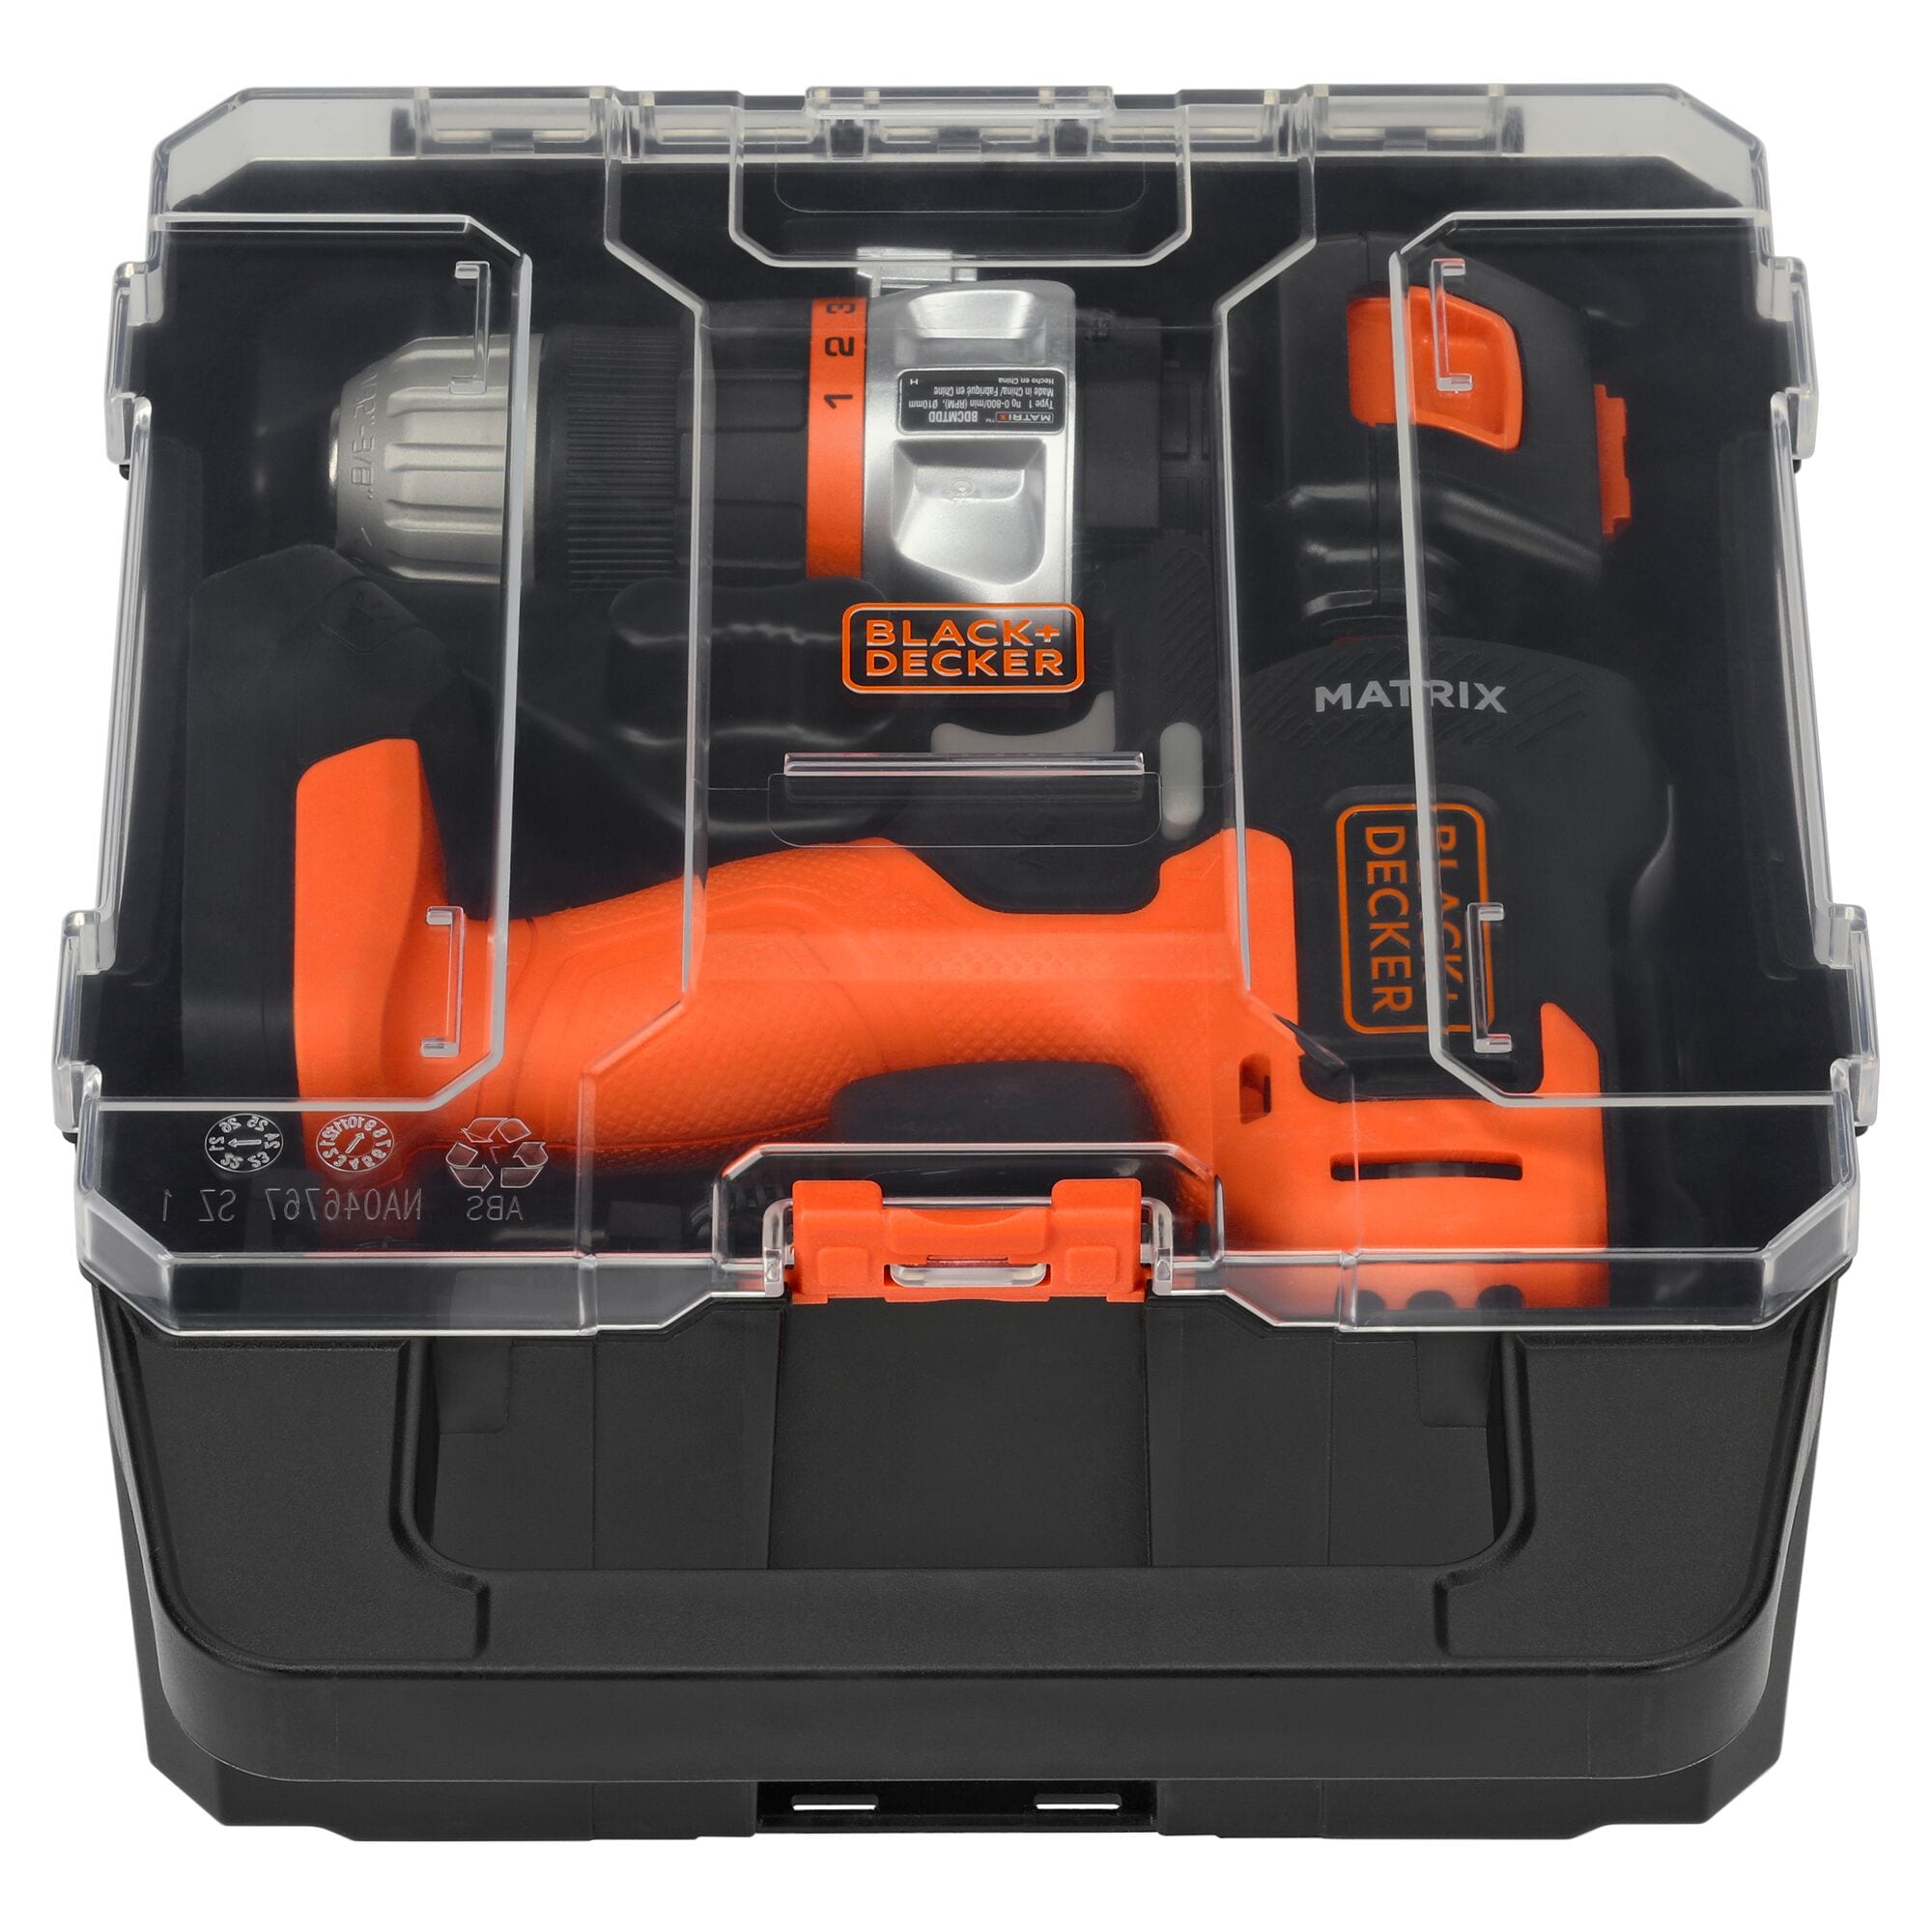 BLACK+DECKER 1-Tool Power Tool Combo Kit with Hard Case (1-Battery